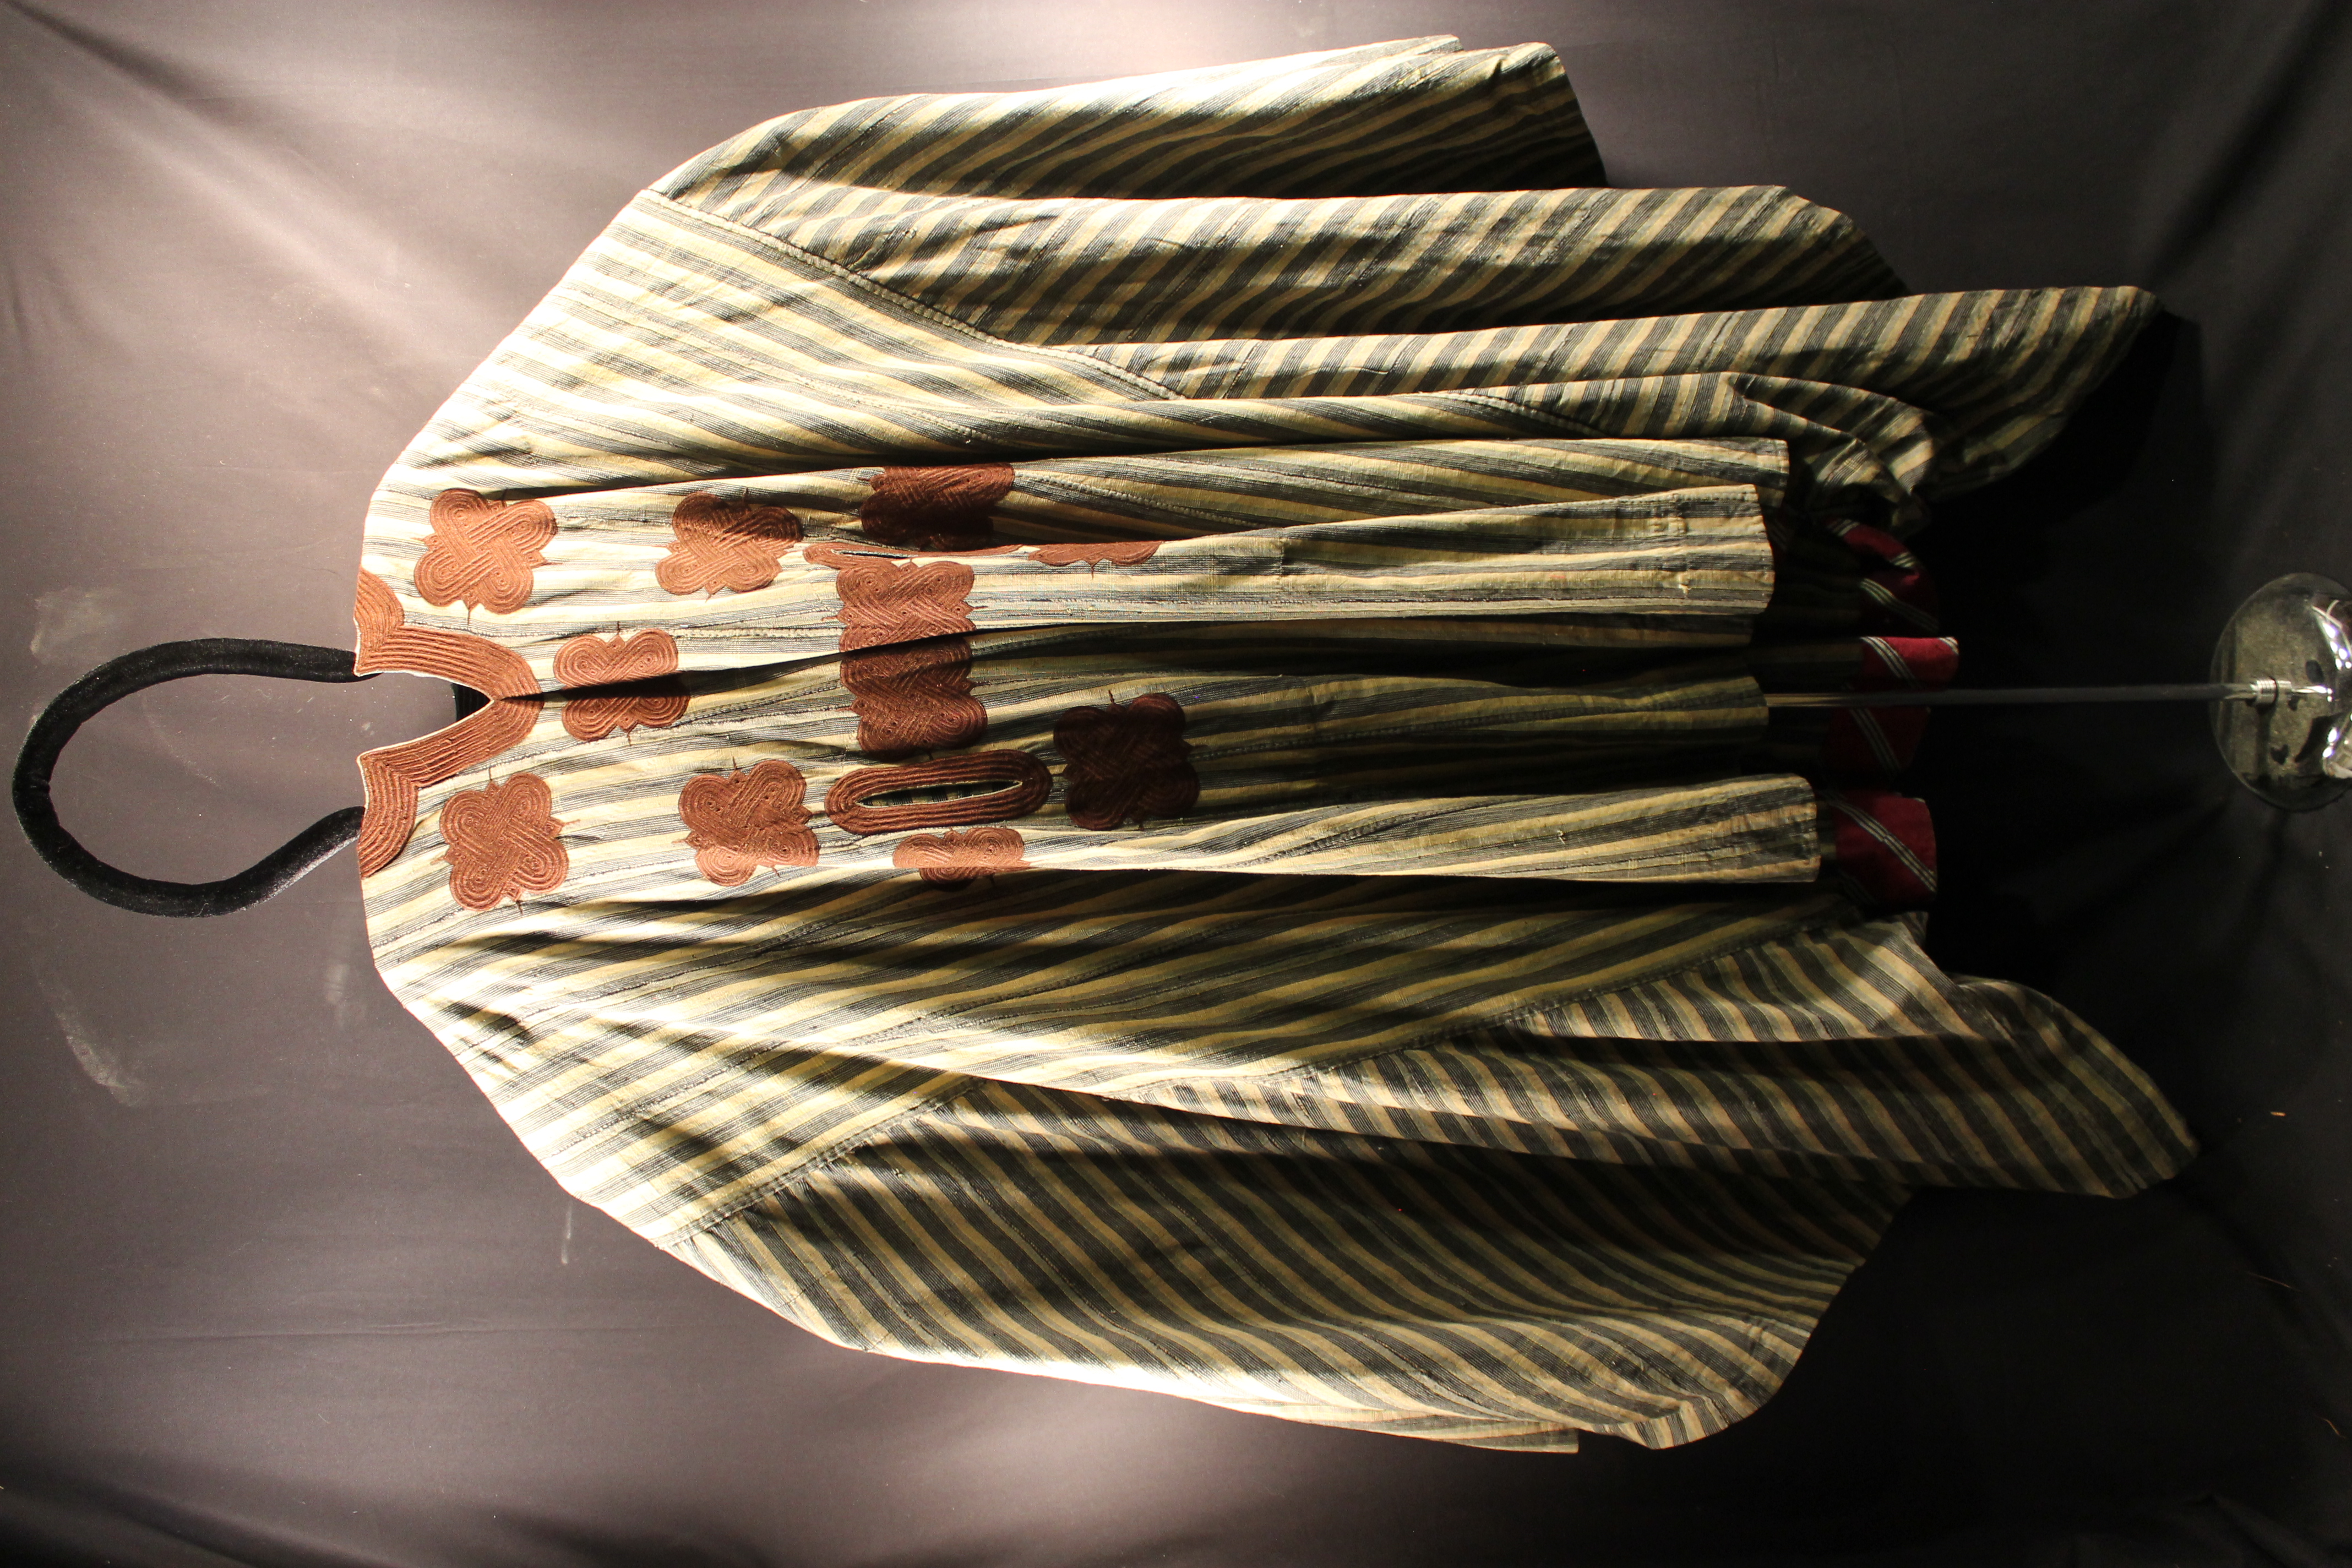 Robe made of green and tan stripe material. Brown embroidery around the neck and on the chest, depicting square patterns.